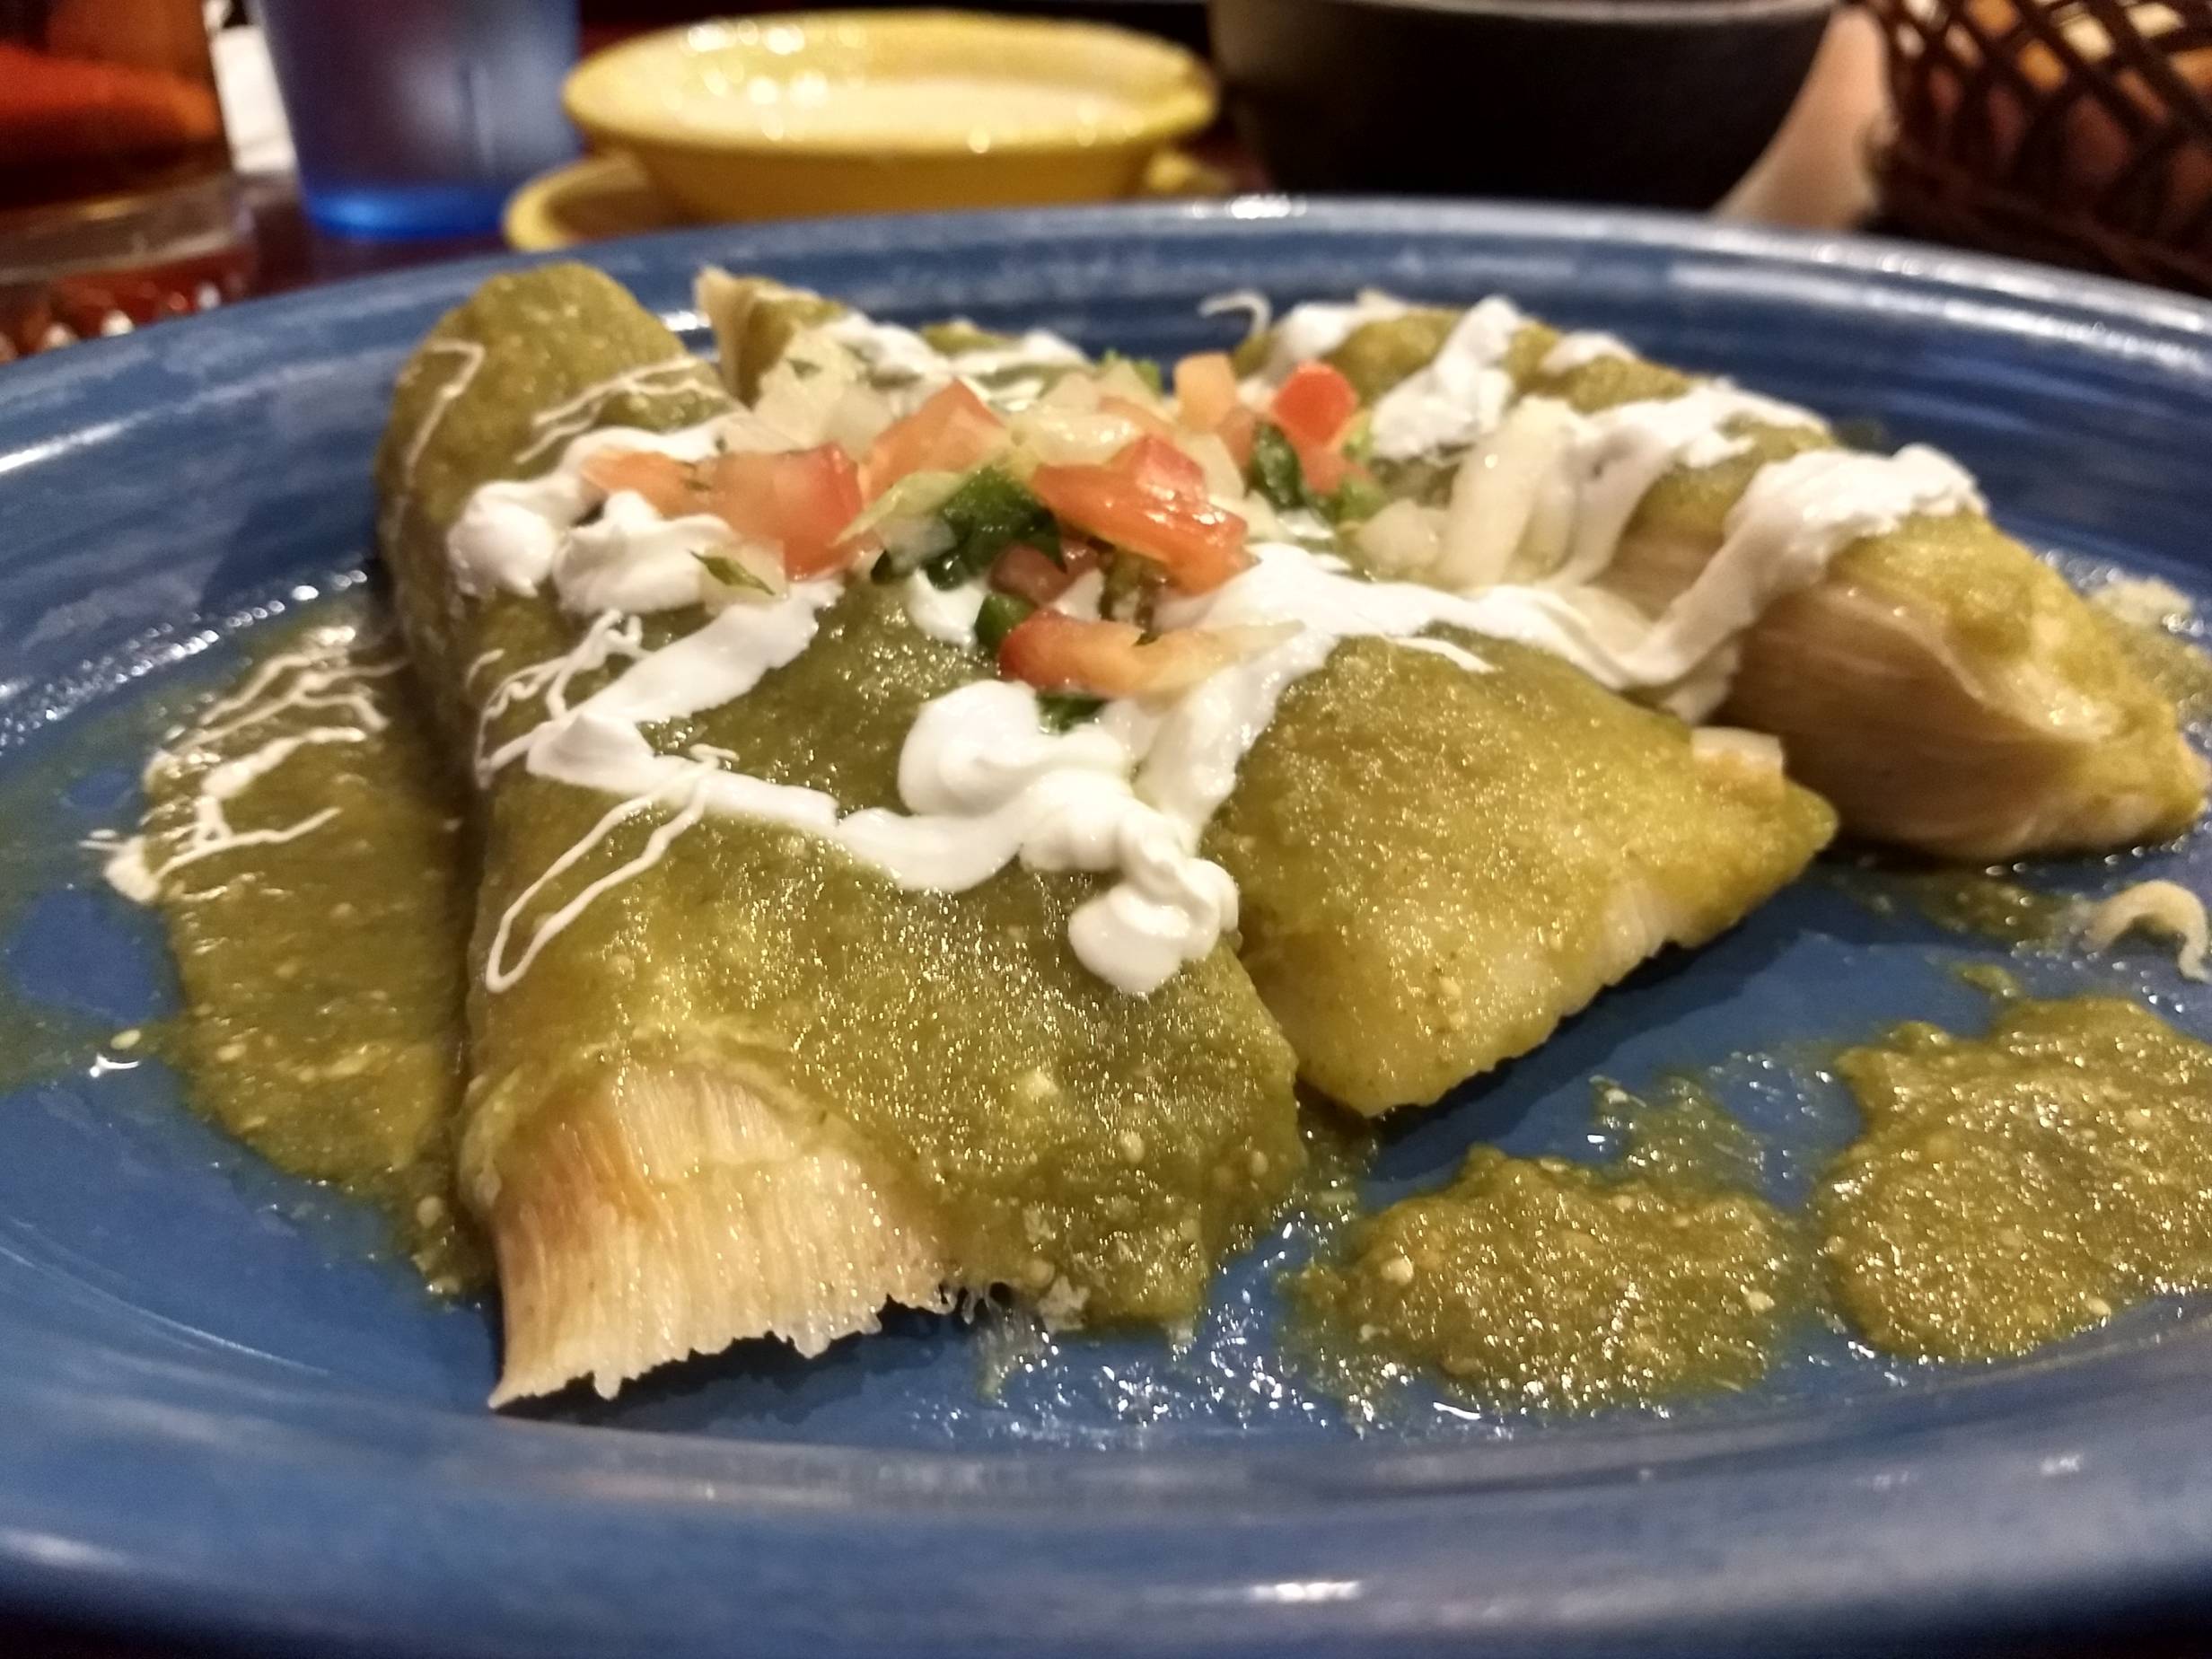 Vegetarian tamales from El Toro. Close up of three tamales covered in green salsa, sour cream, and pico de gallo. Served on a blue plate. Photo by Adam Rahn. 